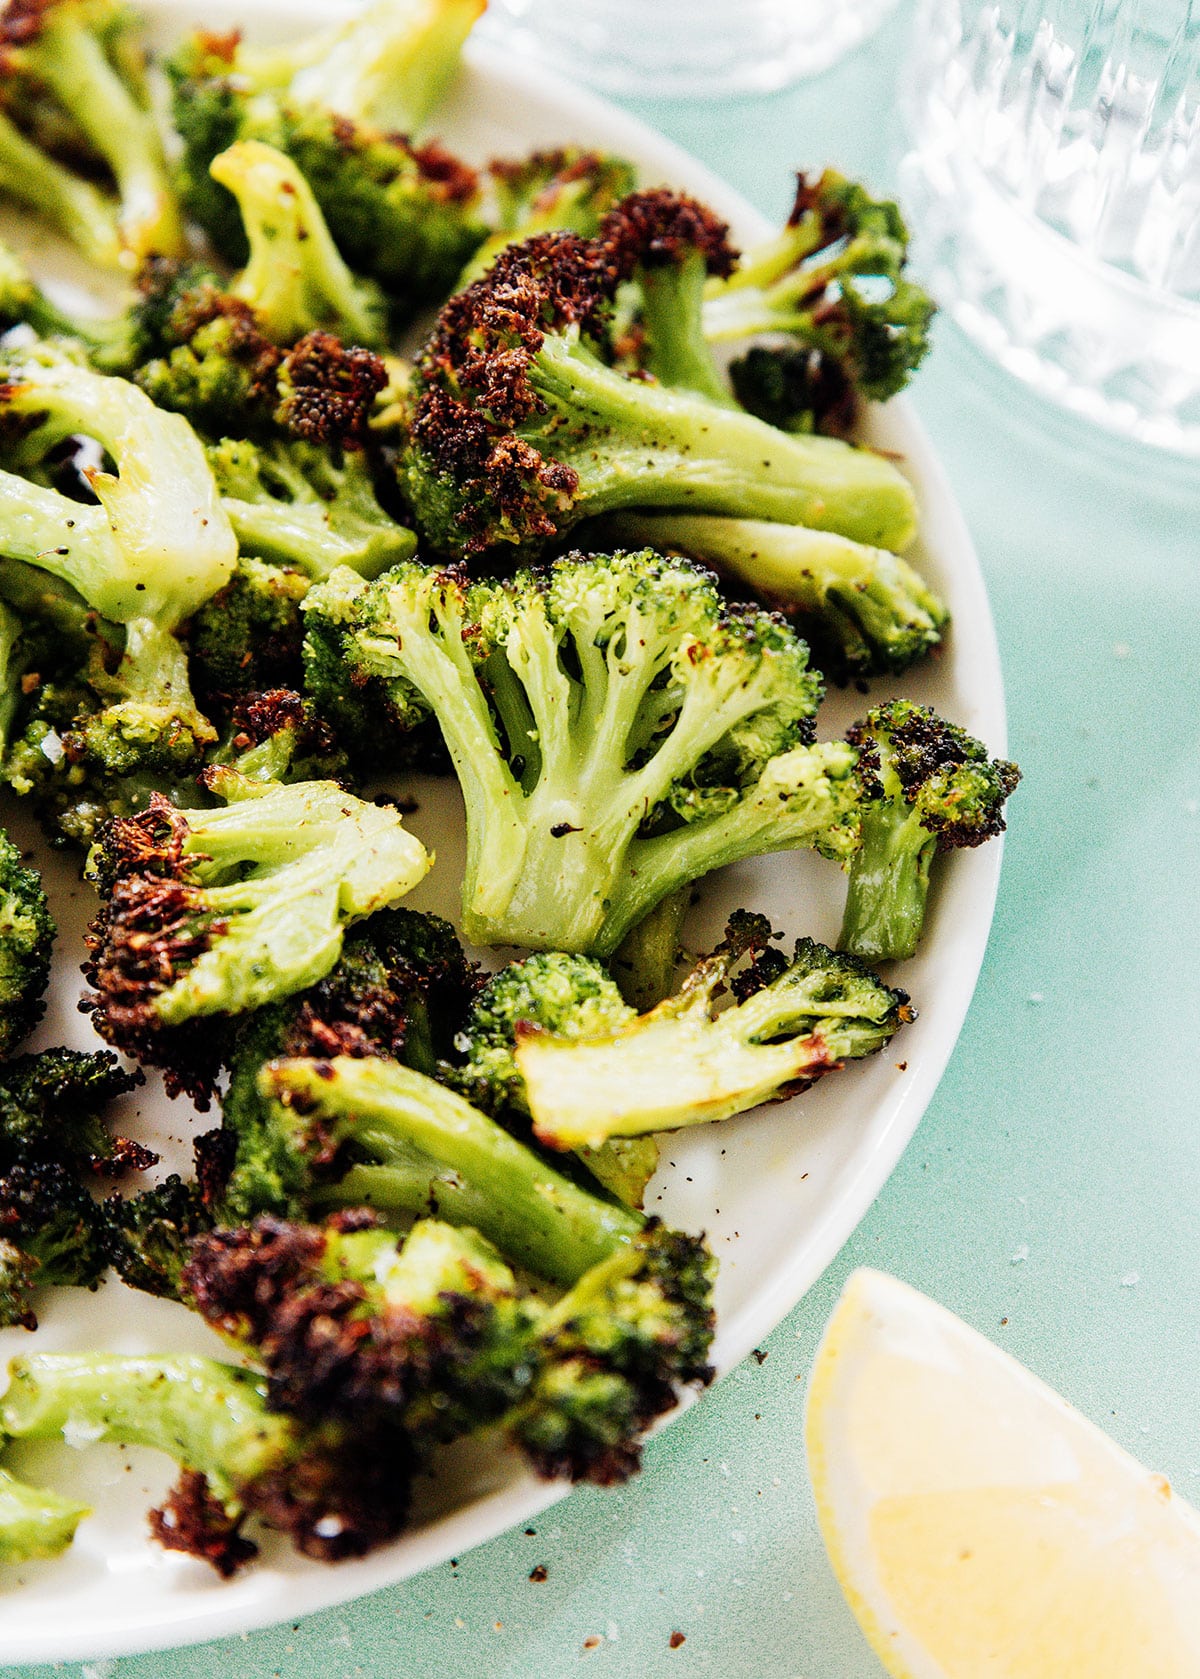 Brown and crispy broccoli florets in a white serving bowl.